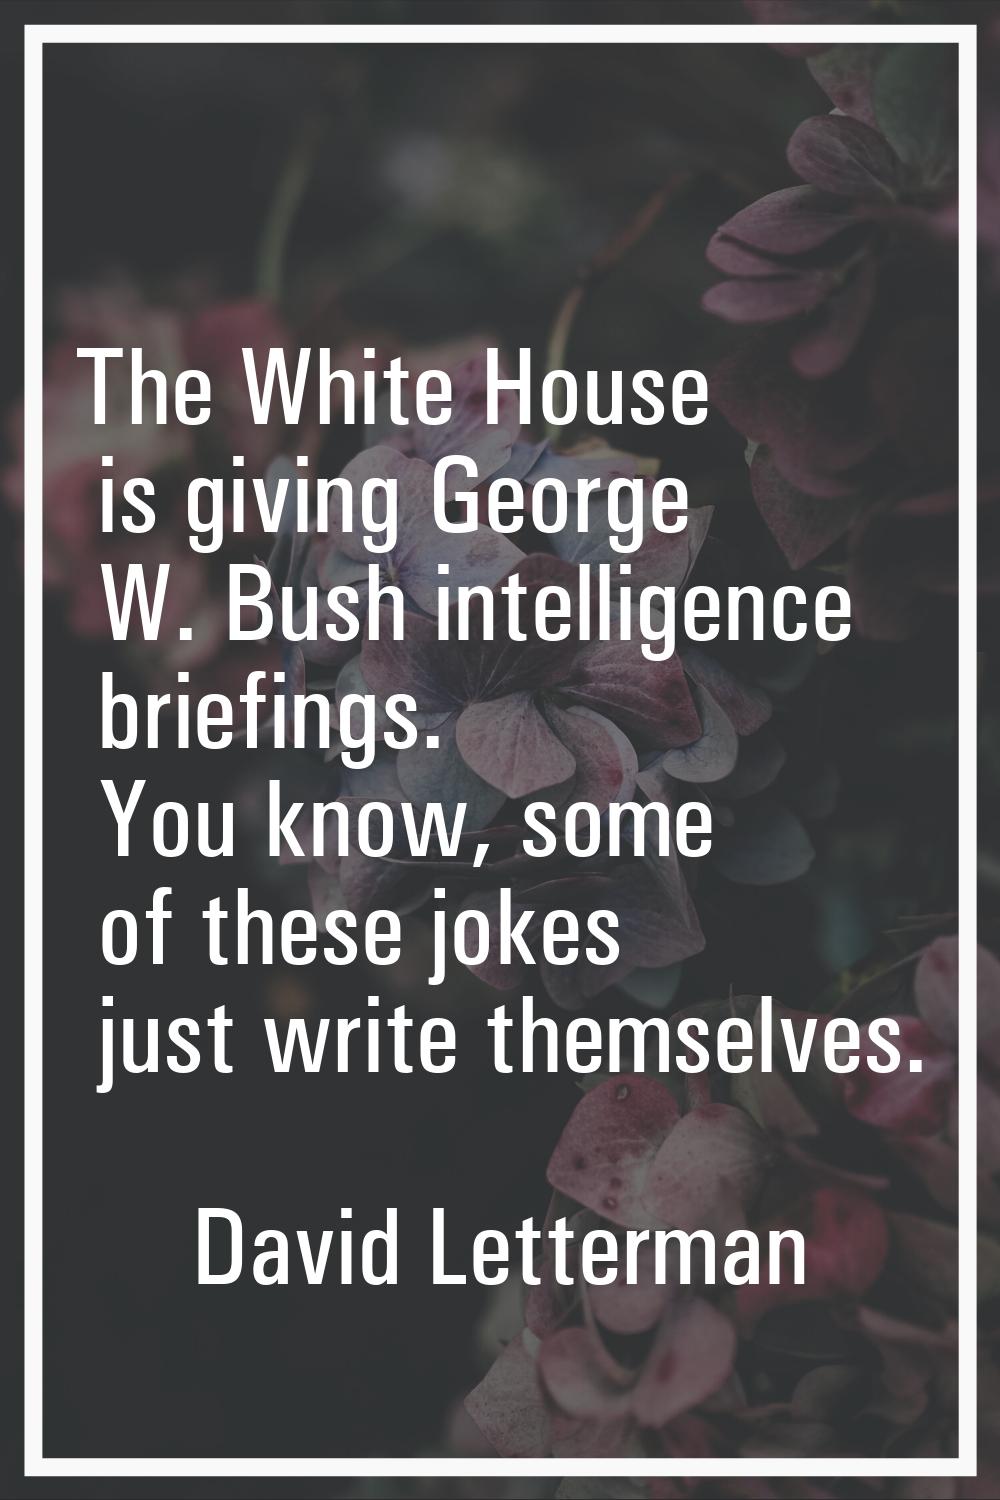 The White House is giving George W. Bush intelligence briefings. You know, some of these jokes just